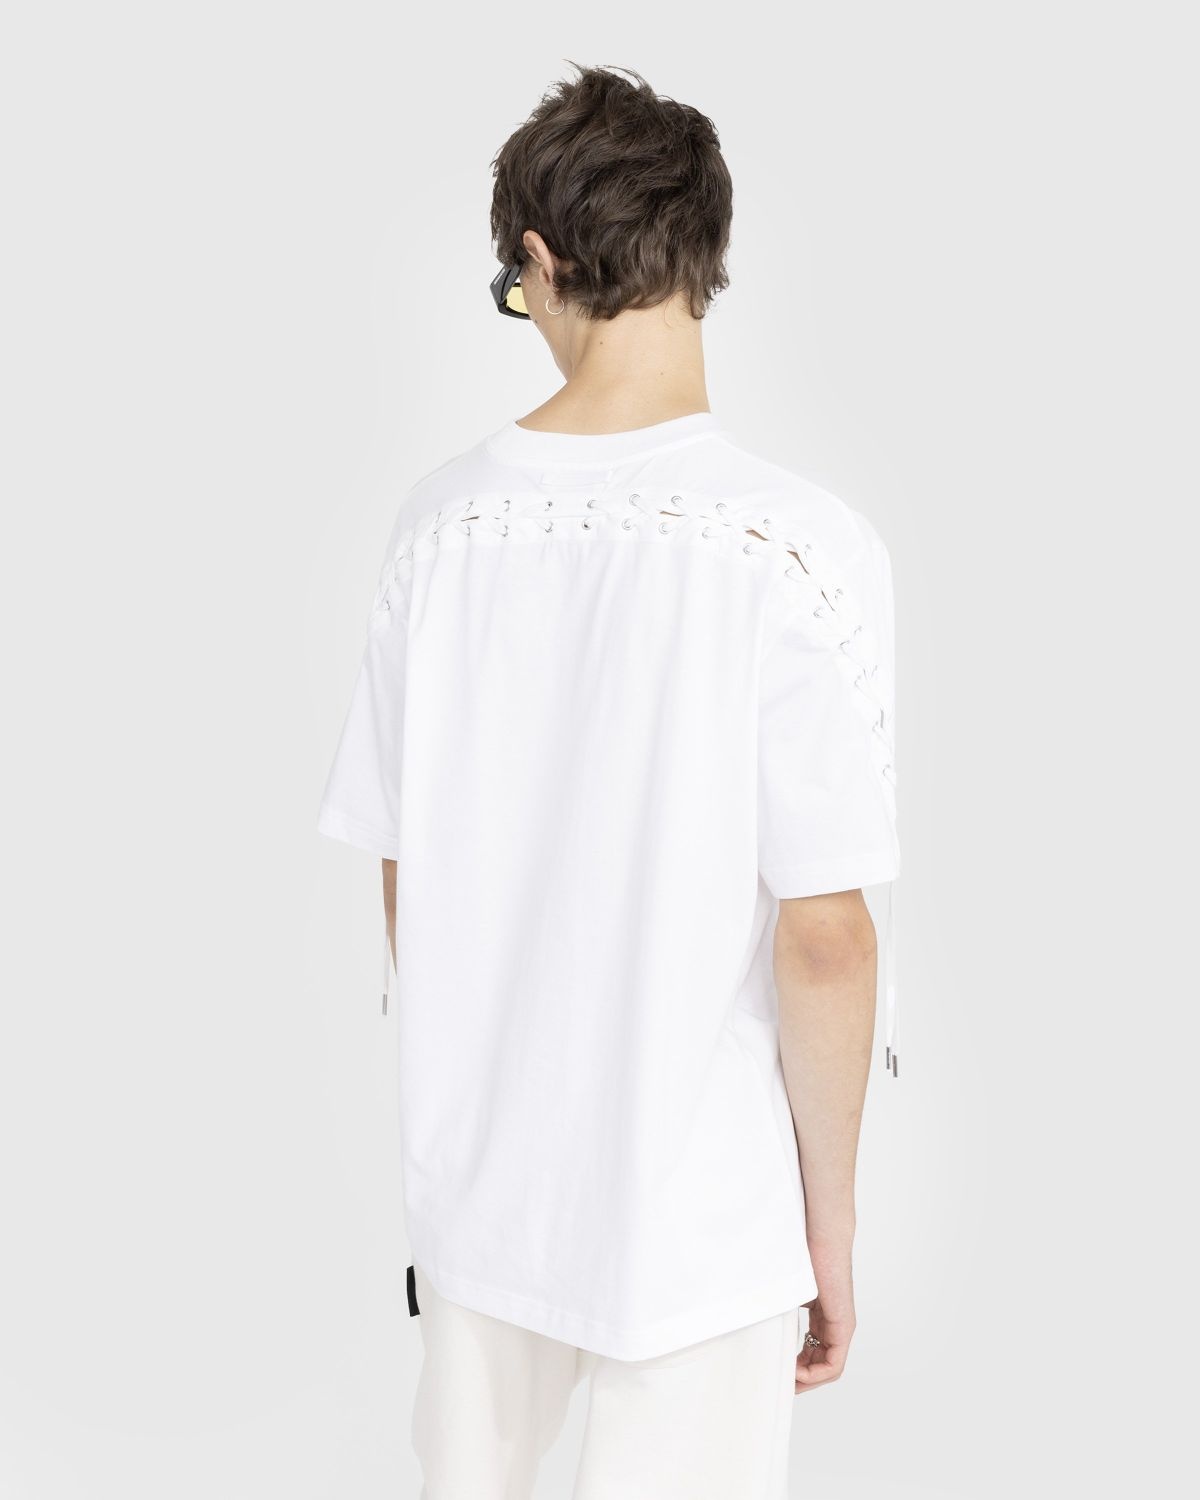 Jean Paul Gaultier – Oversize Laced Tee-Shirt White - 3